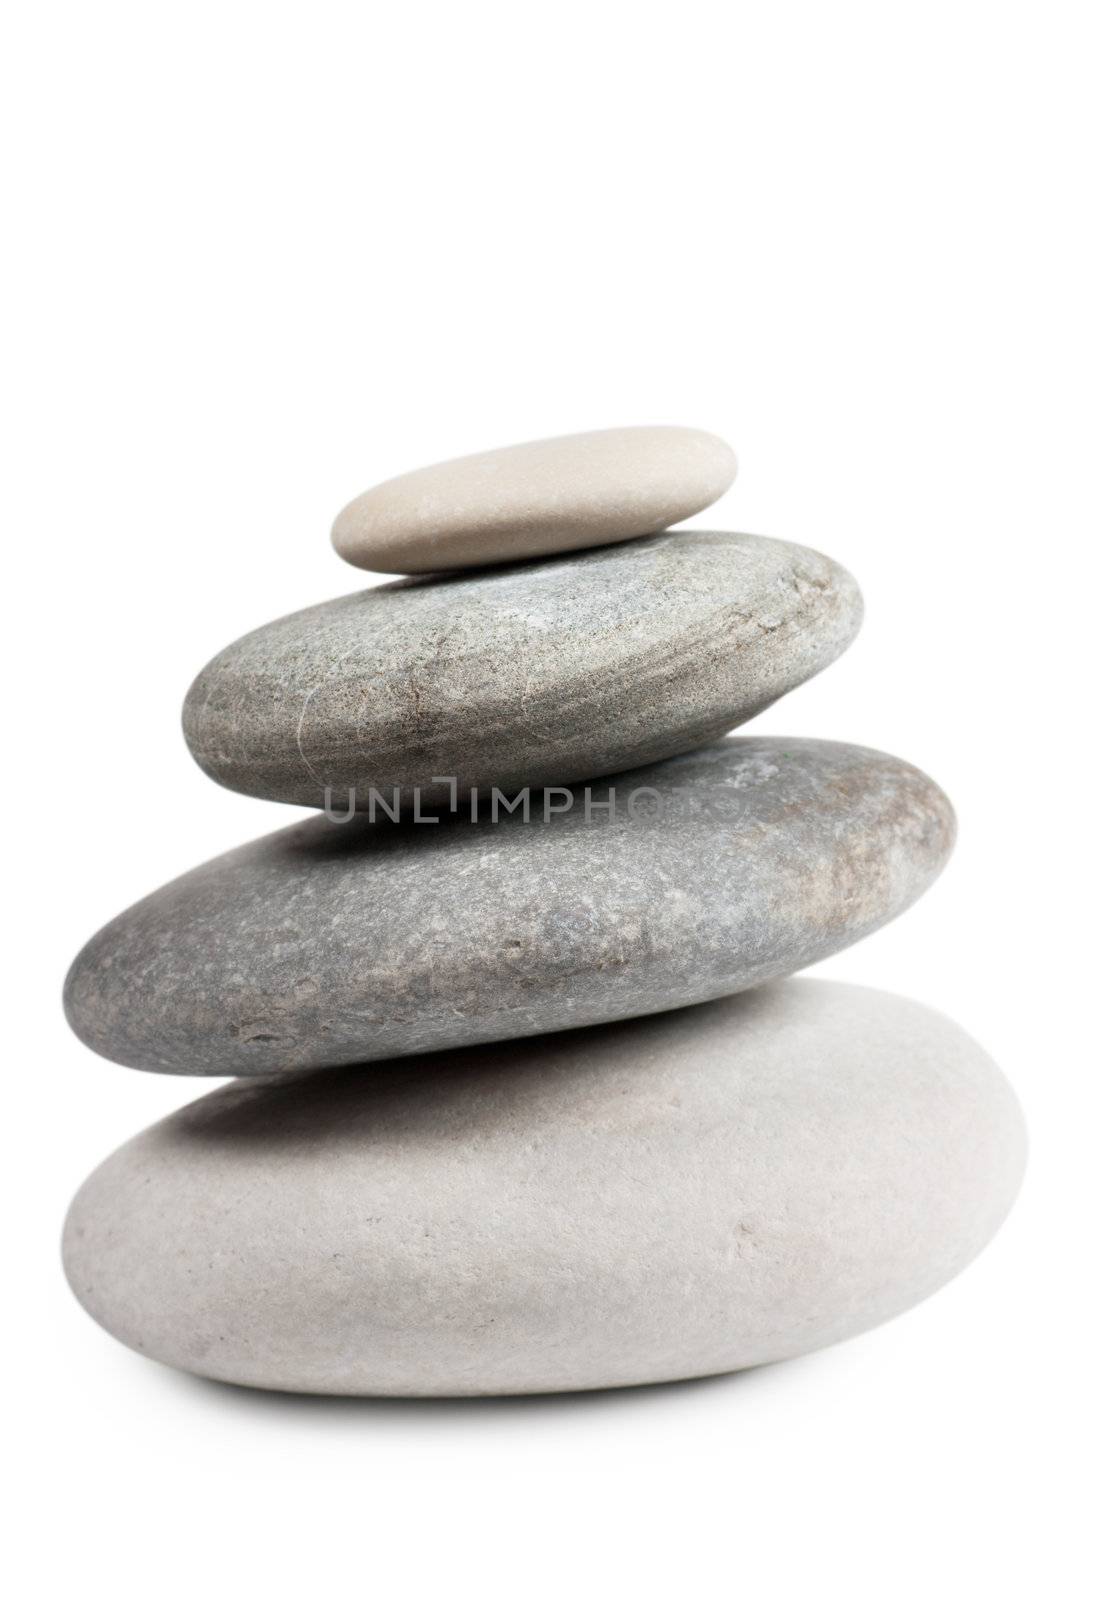 Stack of four round stones isolated over white background